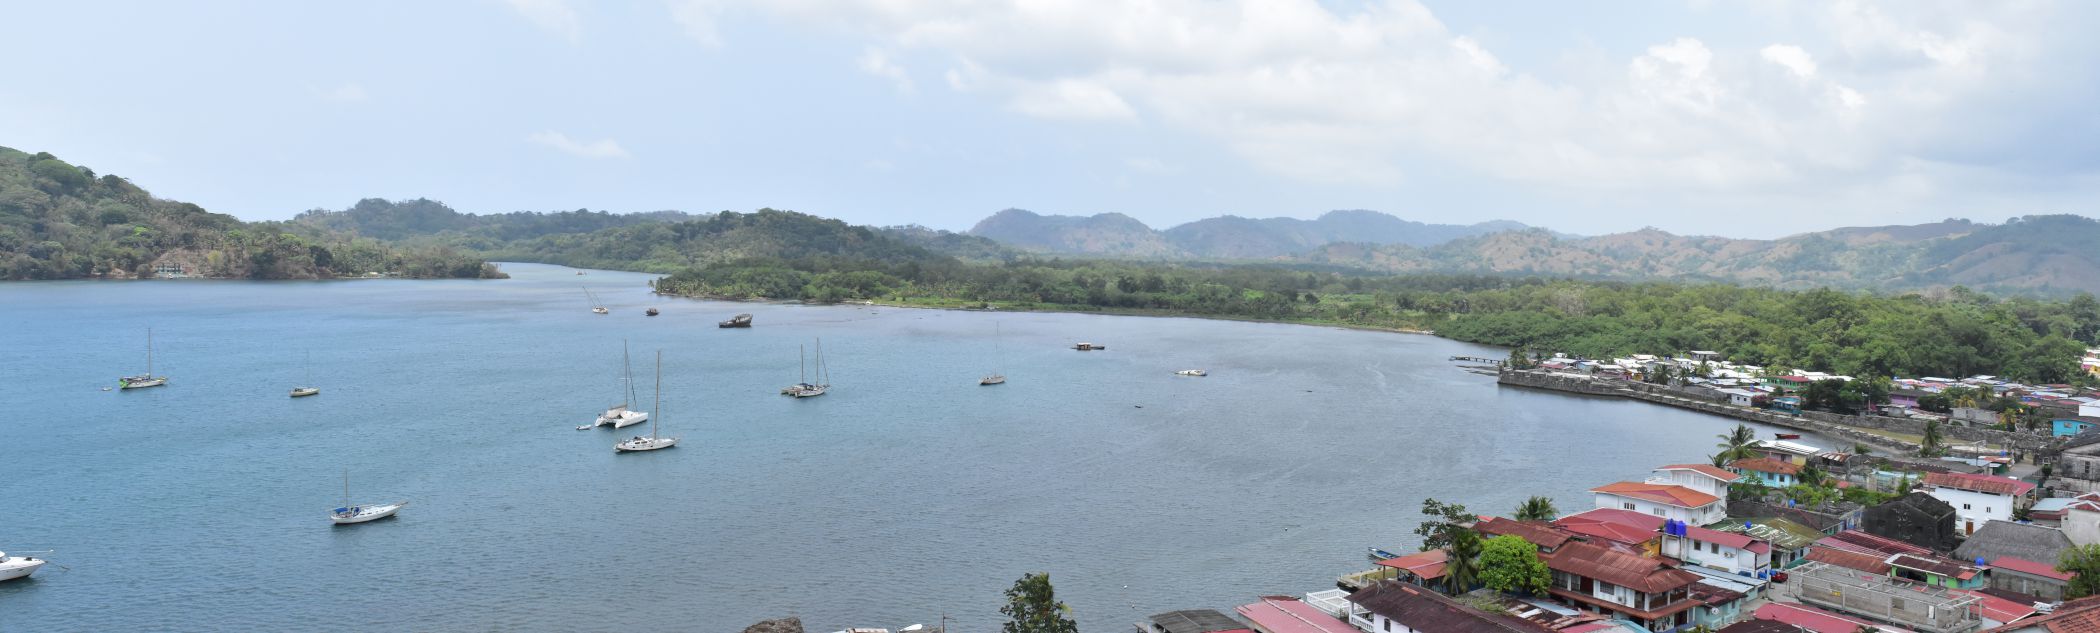 The bay of Portobelo, from the viewpoint of the 17th century Spanish fort (built by enslaved Africans) that looks upon hills housing the likely site of Santaigo del Príncipe, was the first community established by former maroons after their peace with the Spanish. Photo by Robert Schwaller.